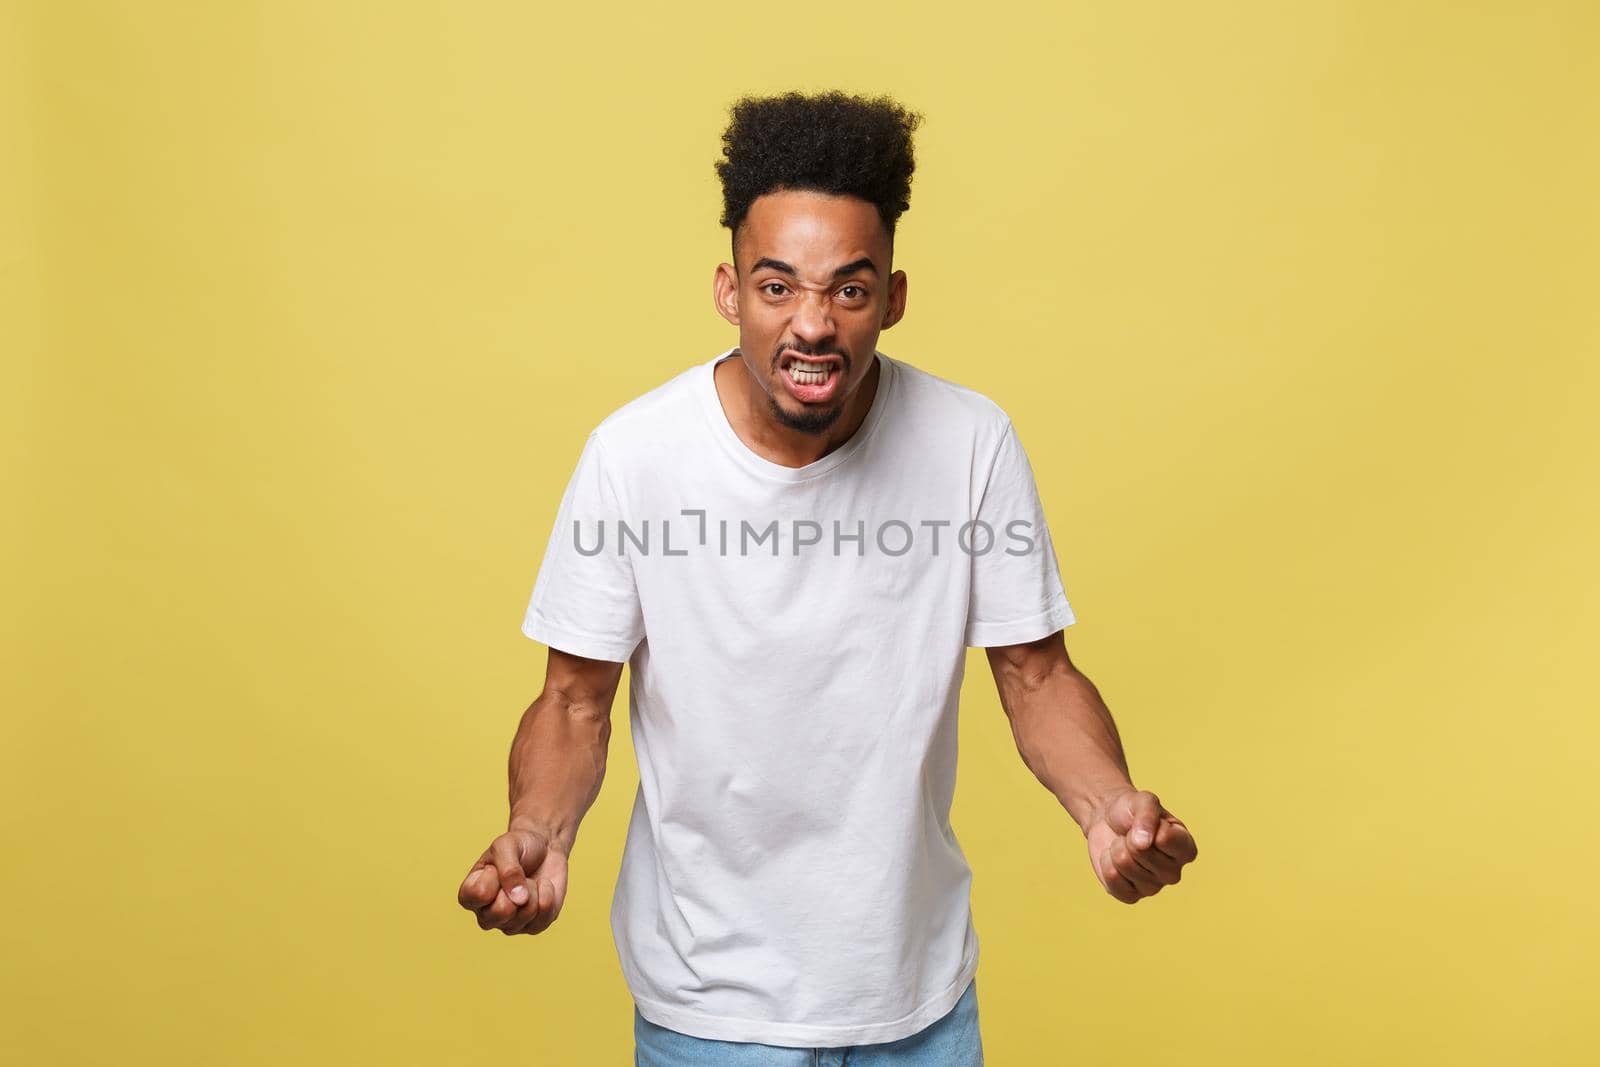 Portrait of angry or annoyed young African American man in white shirt looking at the camera with displeased expression. Negative human expressions, emotions, feelings. Body language